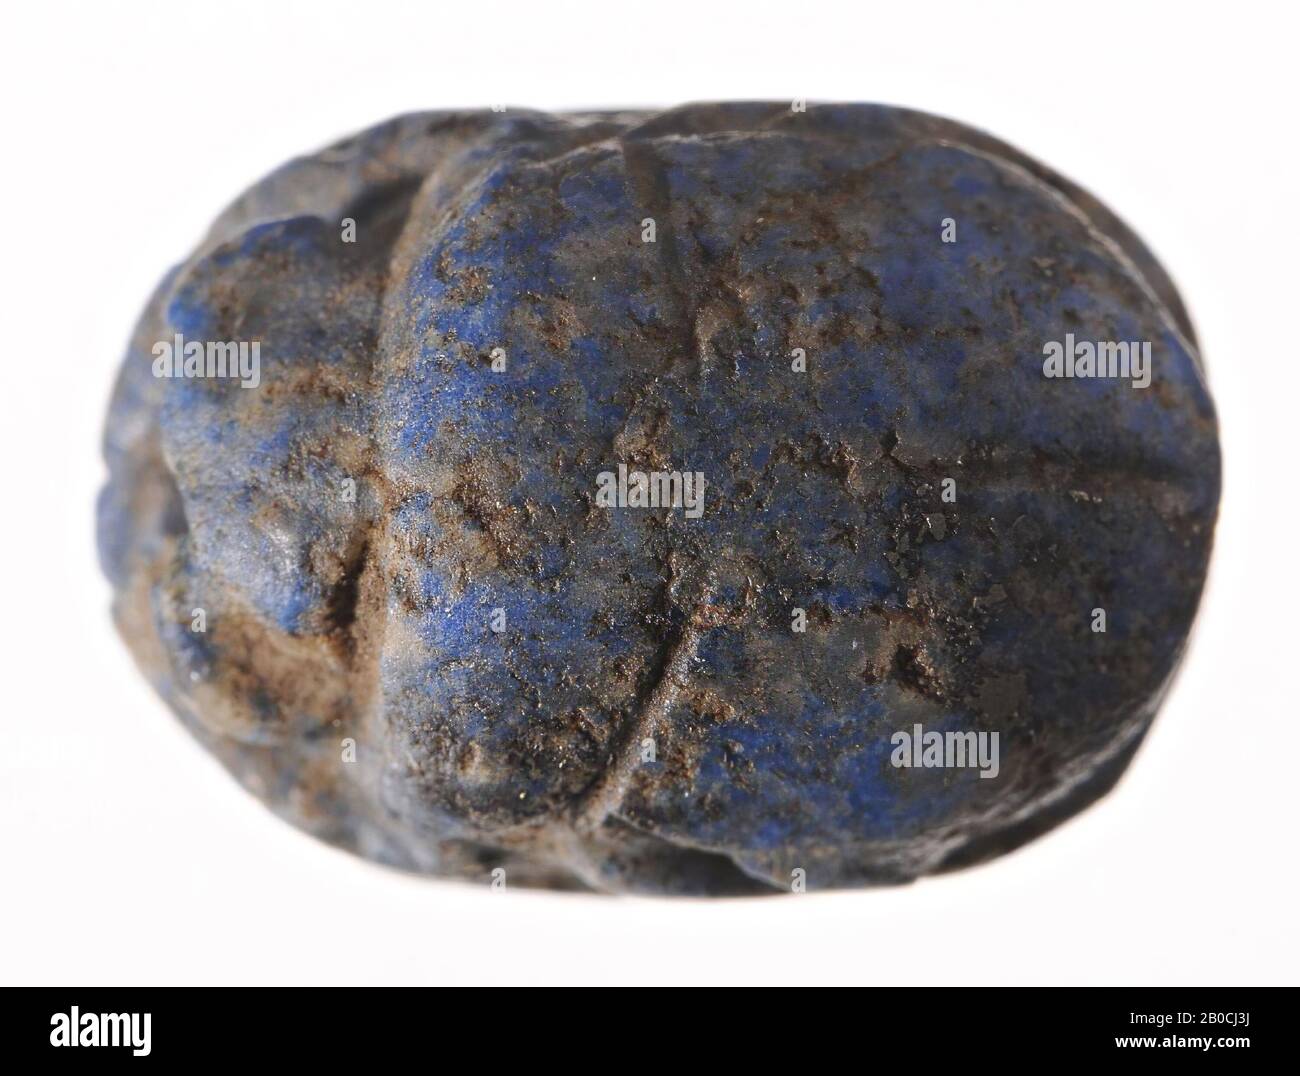 scarab, Scarab with rather concisely cut back, legs roughly embossed. Belly side blank., Blue stone with gray-white veins, probably poor quality lapis lazuli. Rather worn off. No damage except slightly round, scarab, lapis lazuli, l. 1.35, b. 1.0, d. 0.55 cm, New Kingdom, 18th-20th Dynasty ca. 1500-1100 BC, Egypt Stock Photo